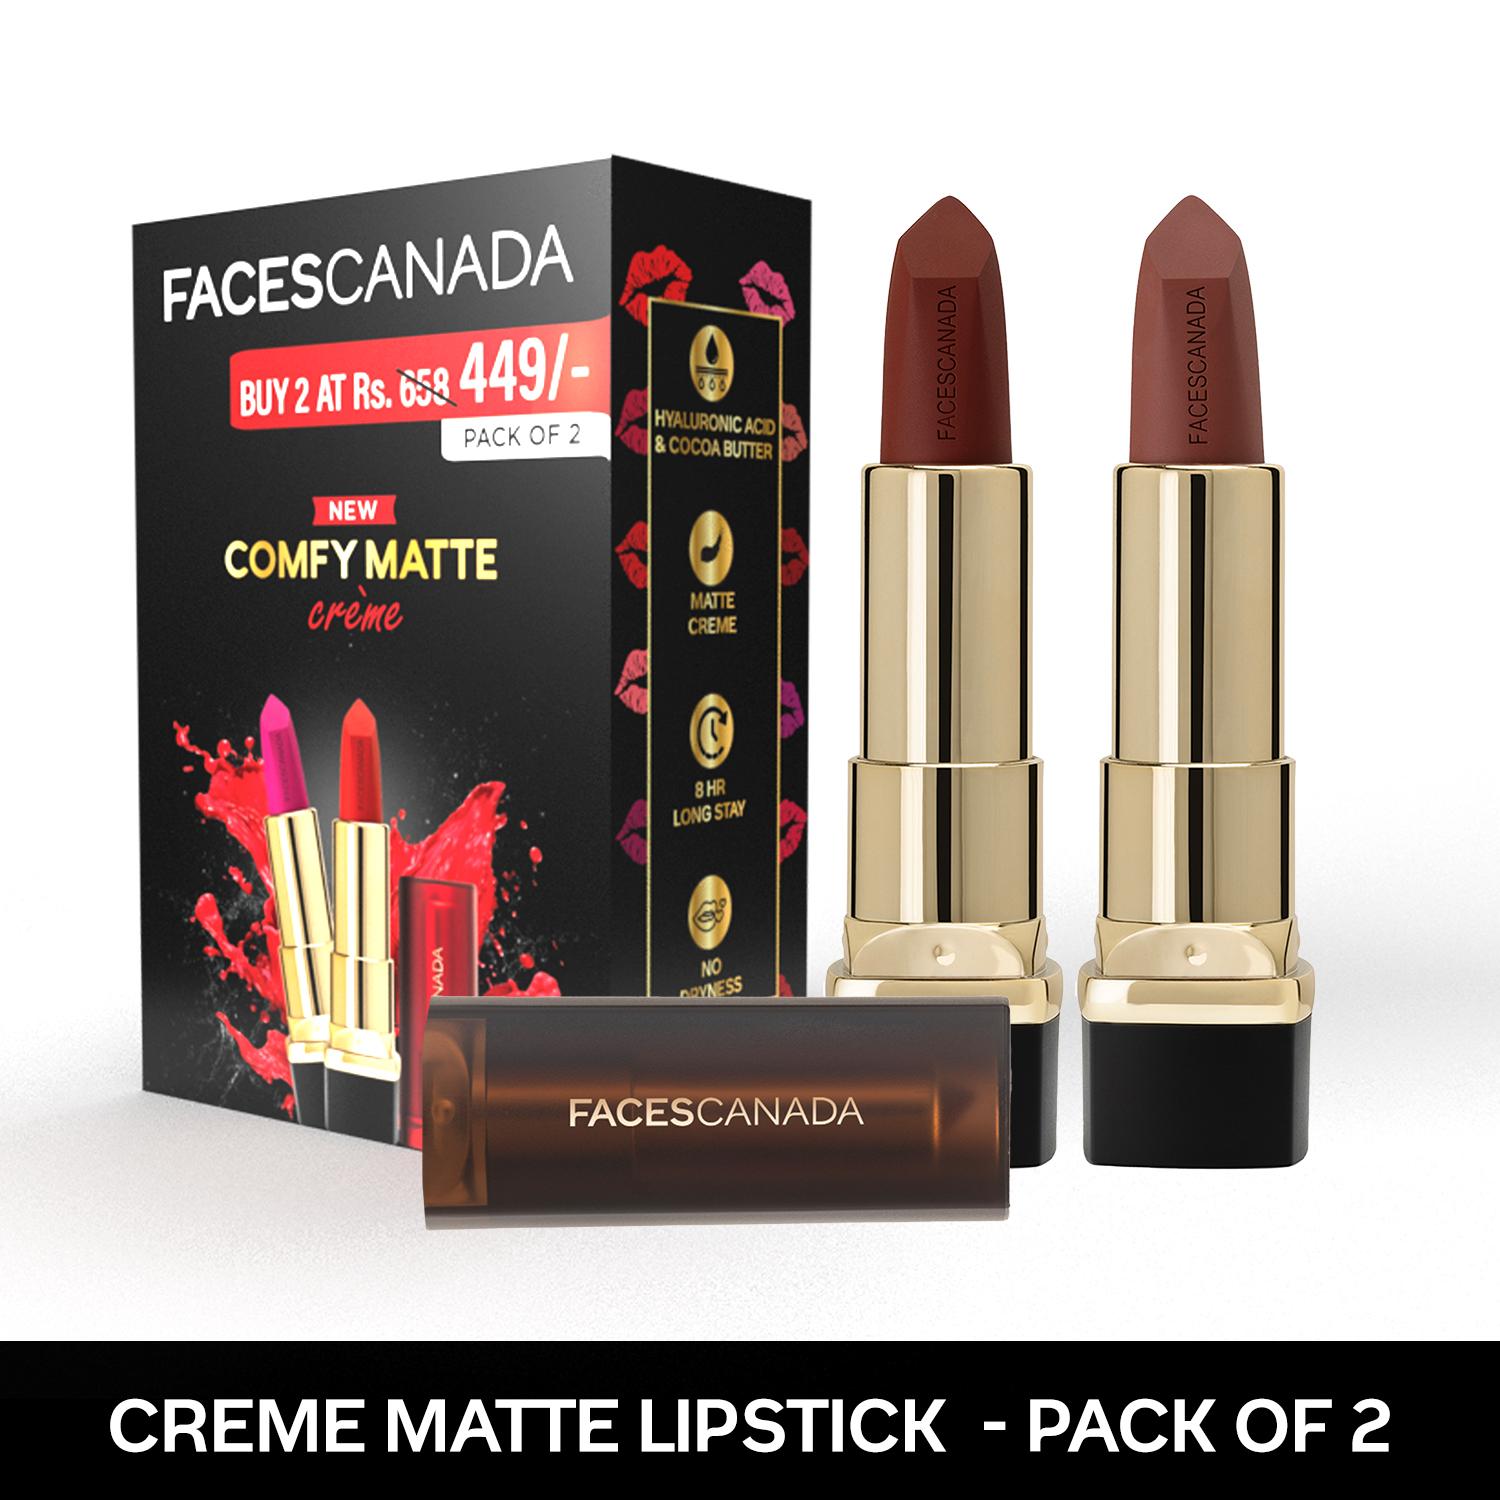 Faces Canada | Faces Canada Festive Hues - Comfy Matte Creme Lipstick Pack of 2 - Don’t You Mind & Nuts About You